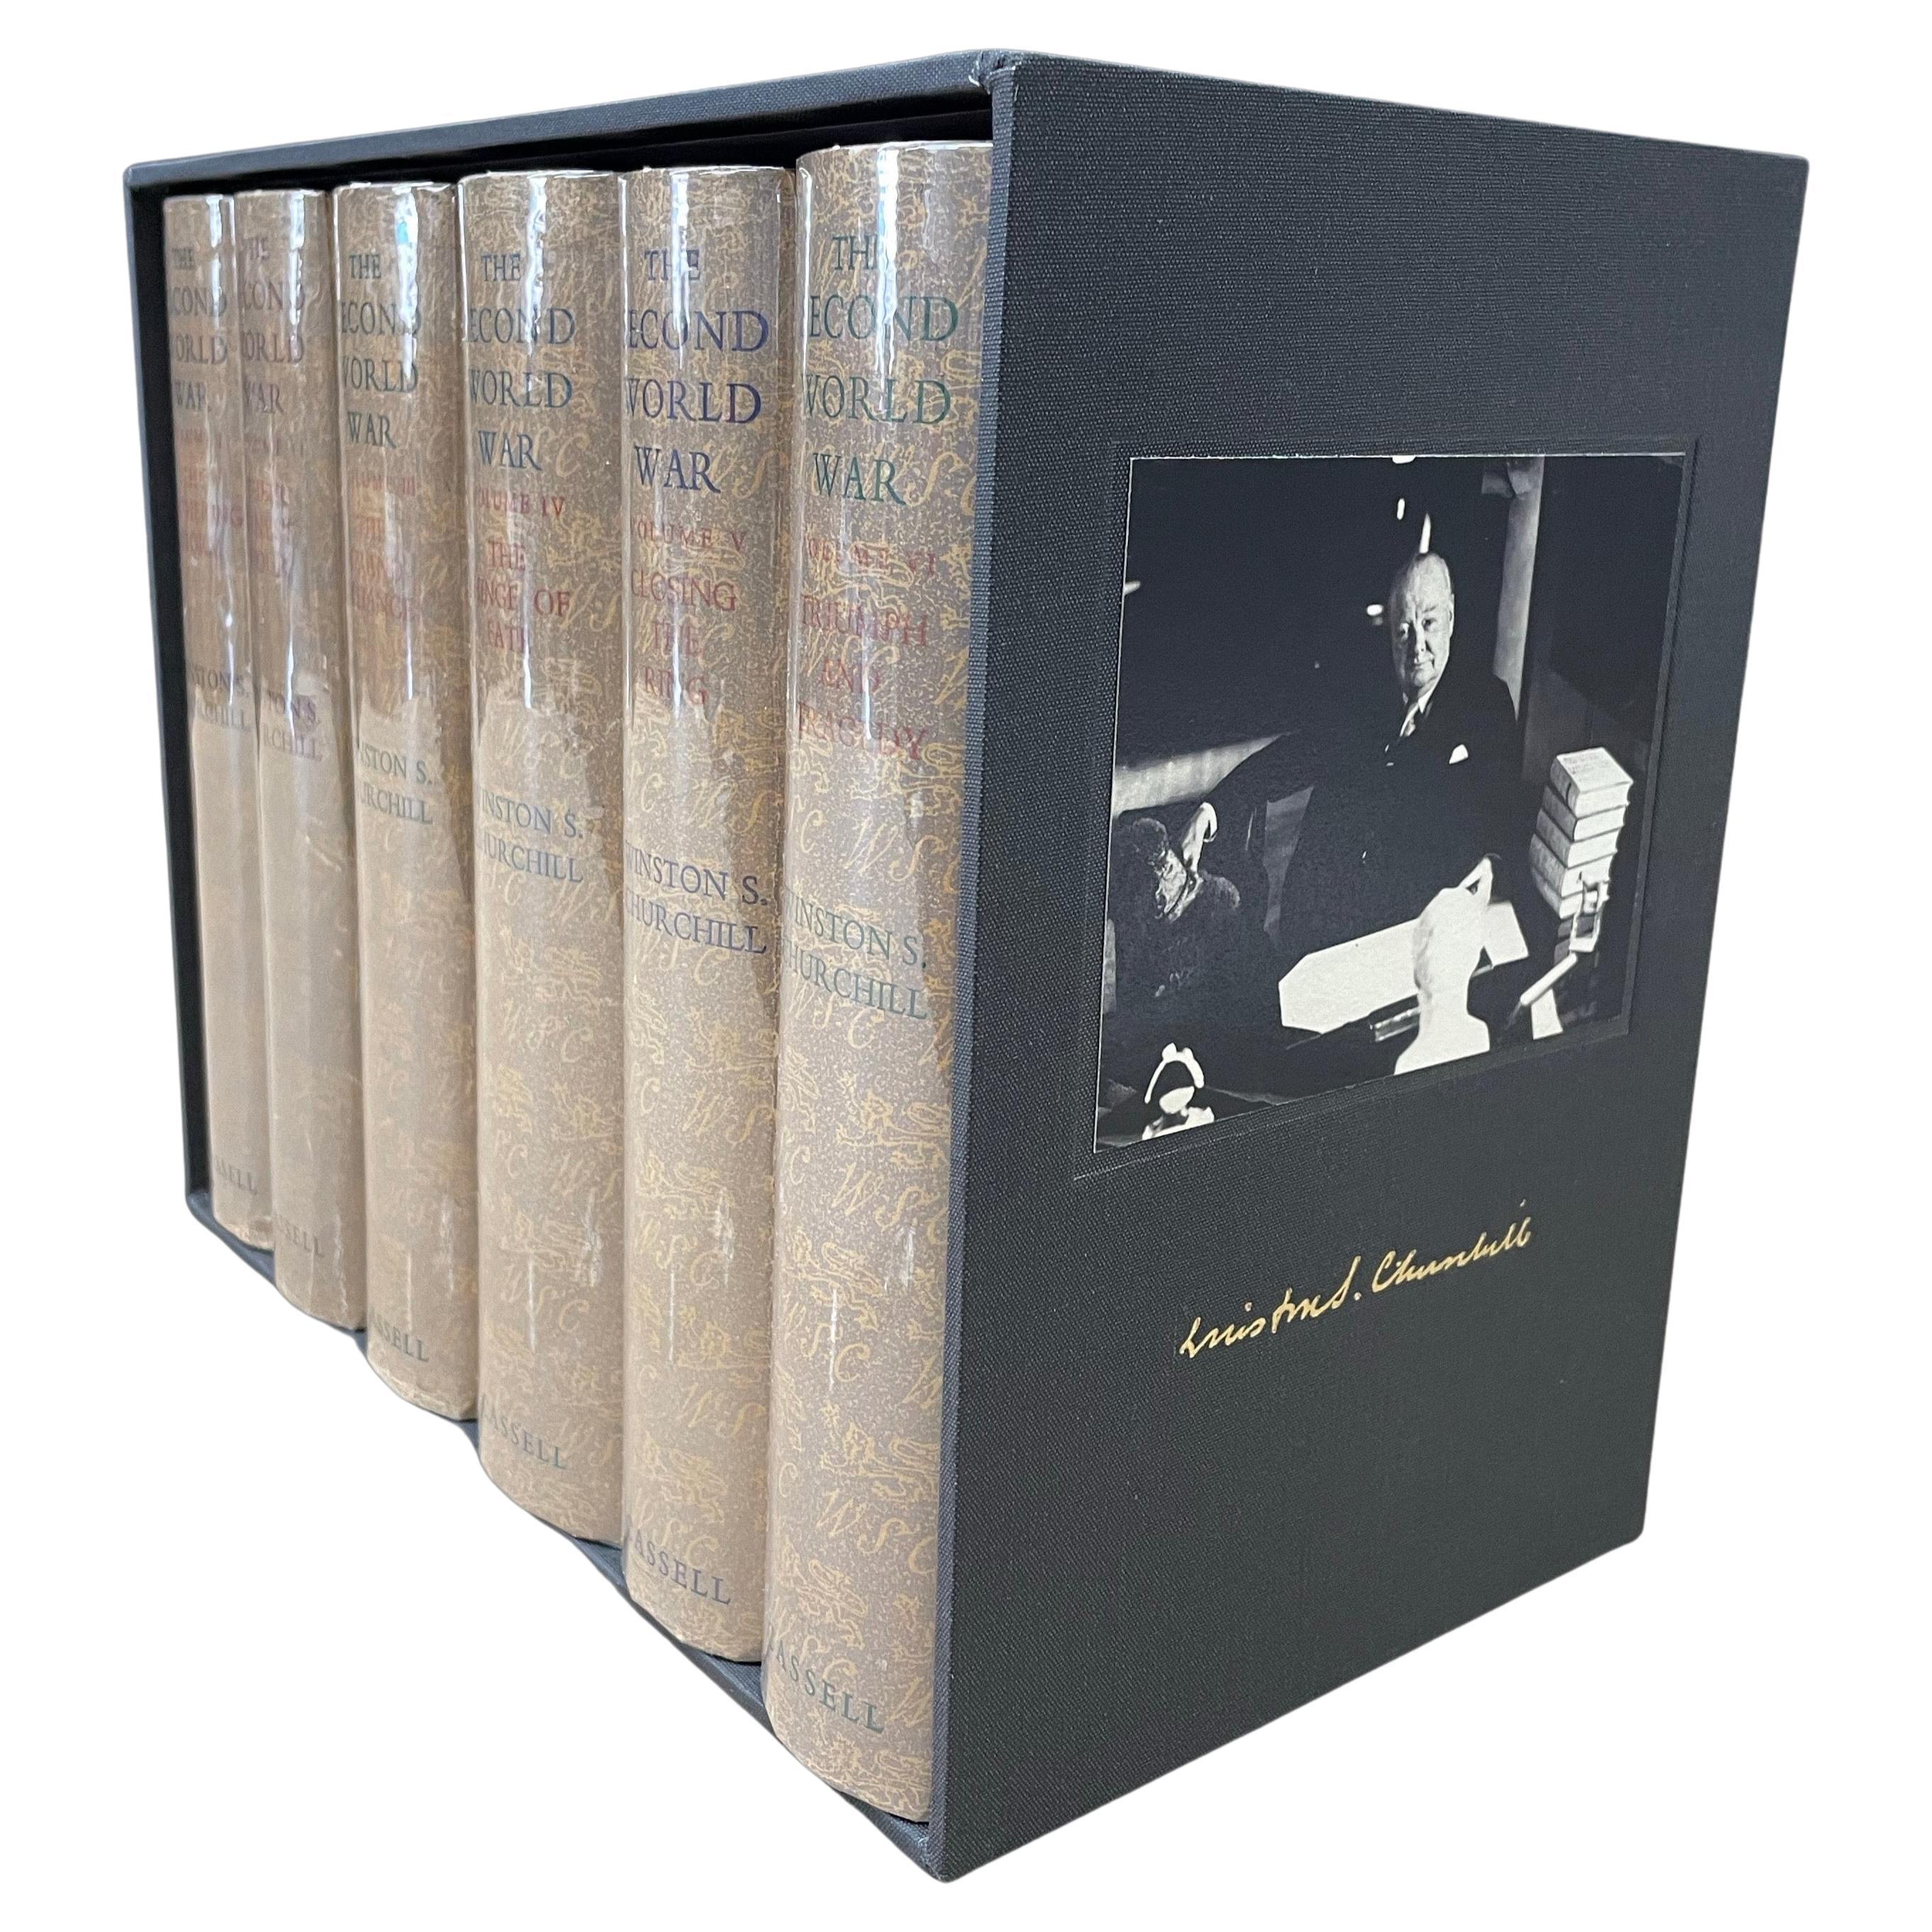 The Second World War by Winston Churchill, First Edition, Original Dust Jackets For Sale